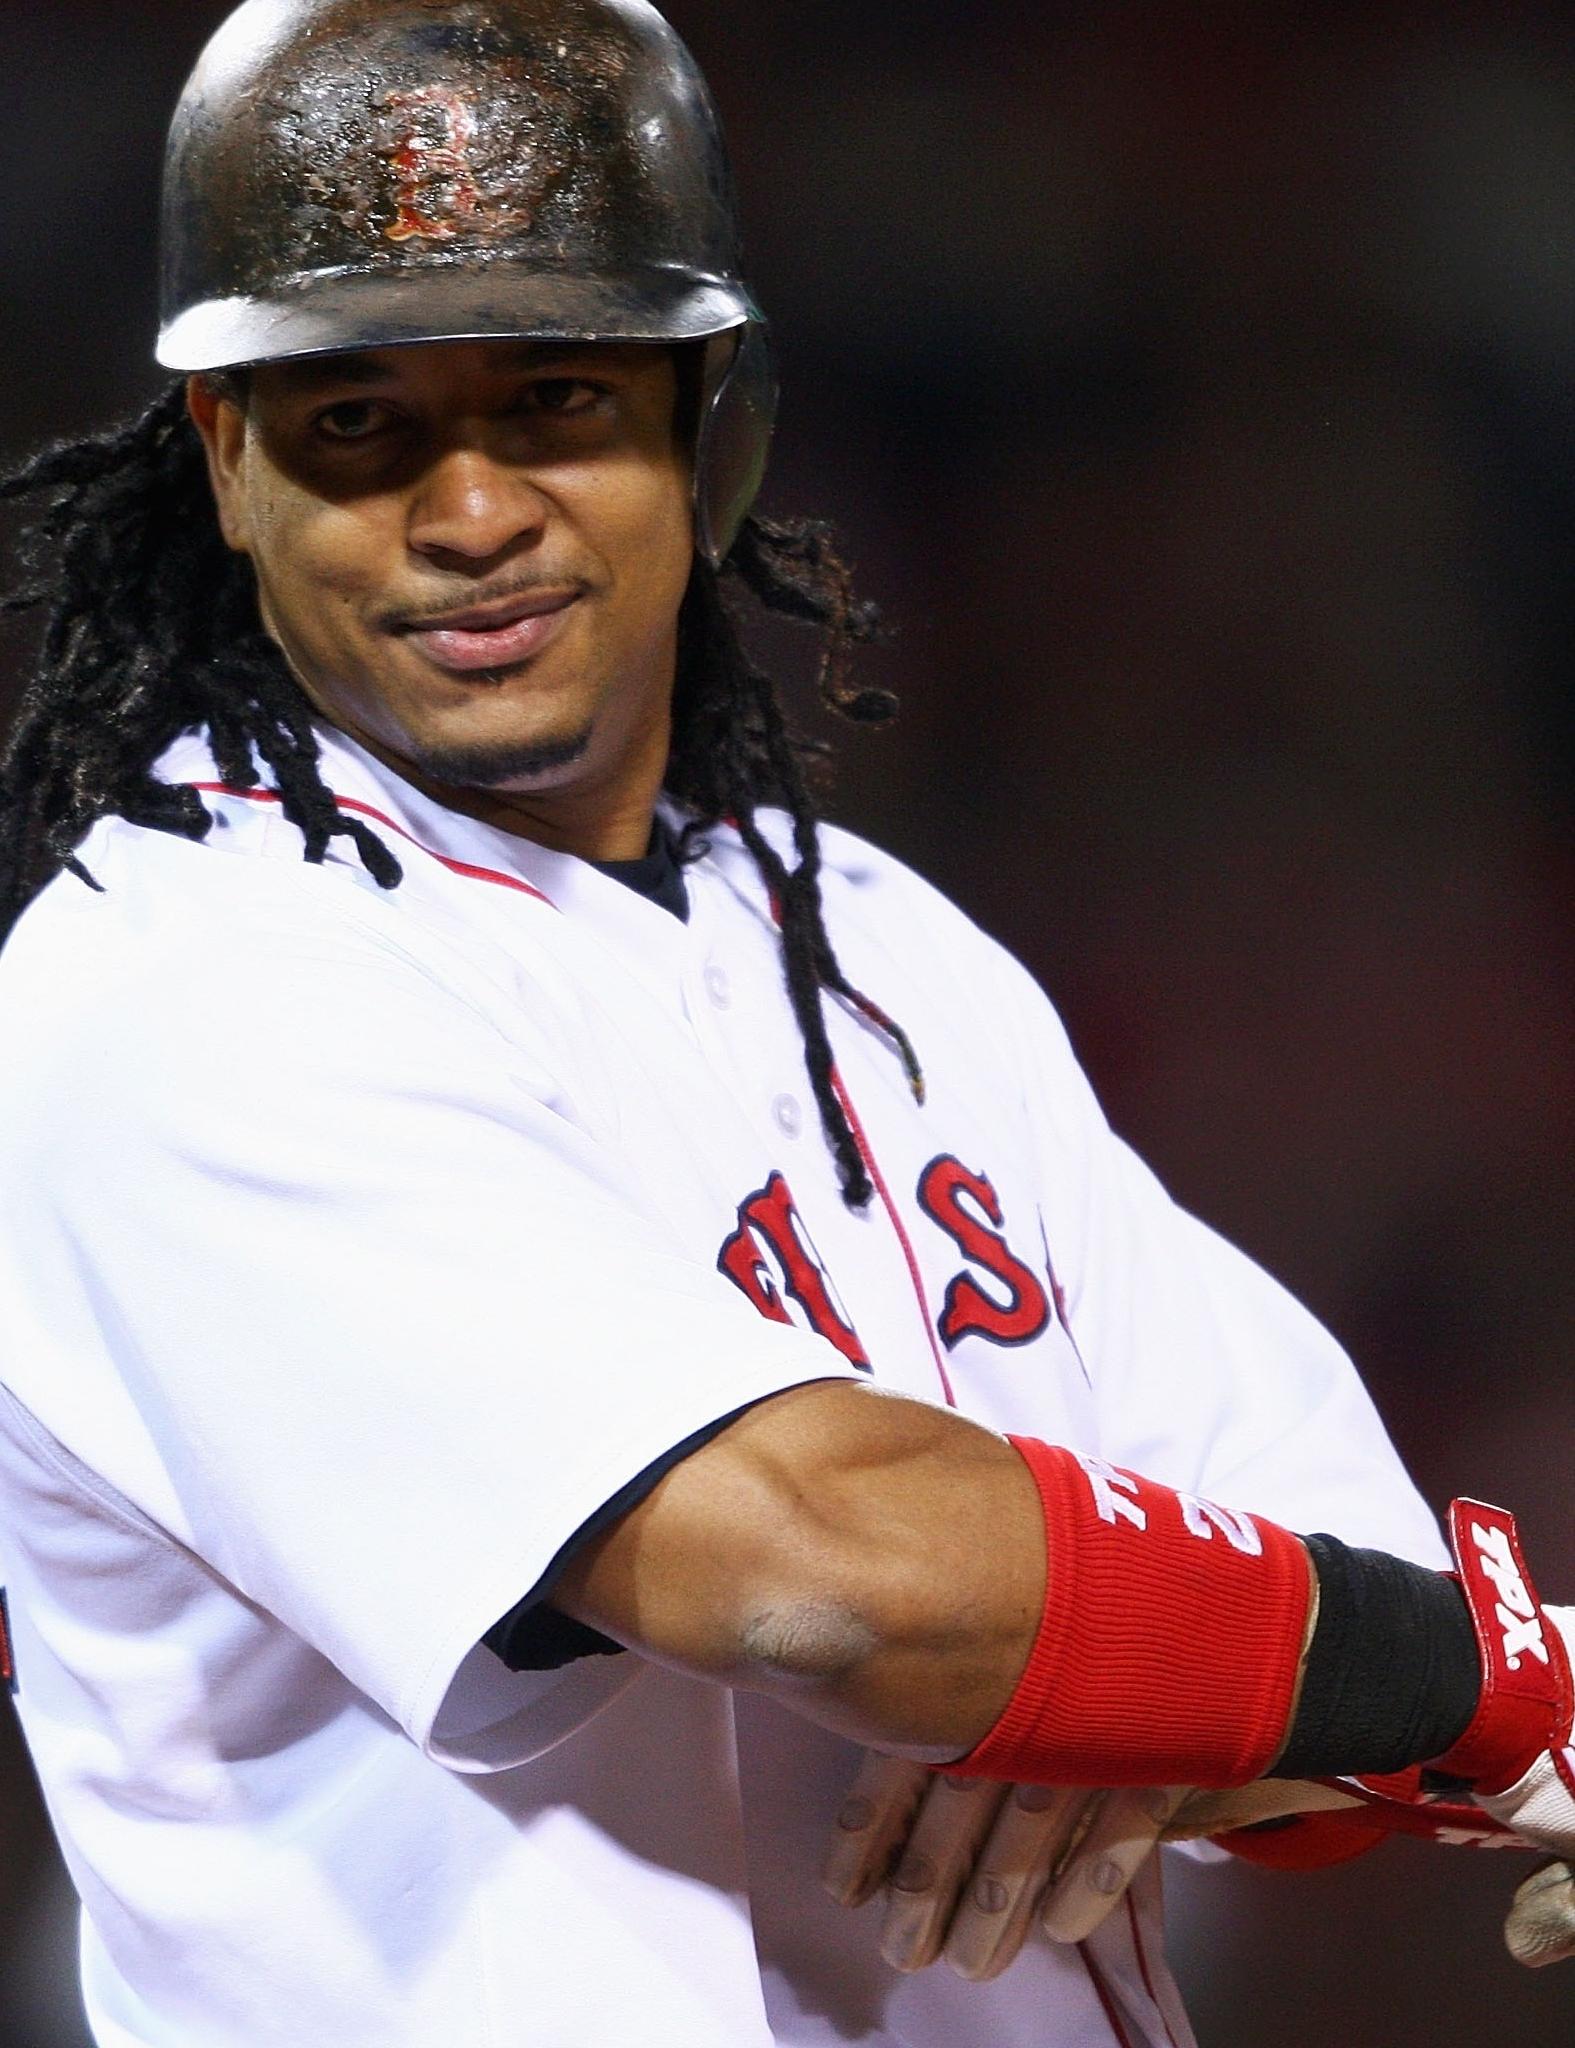 Would you welcome Manny Ramirez back to the Cleveland Indians? (poll) 